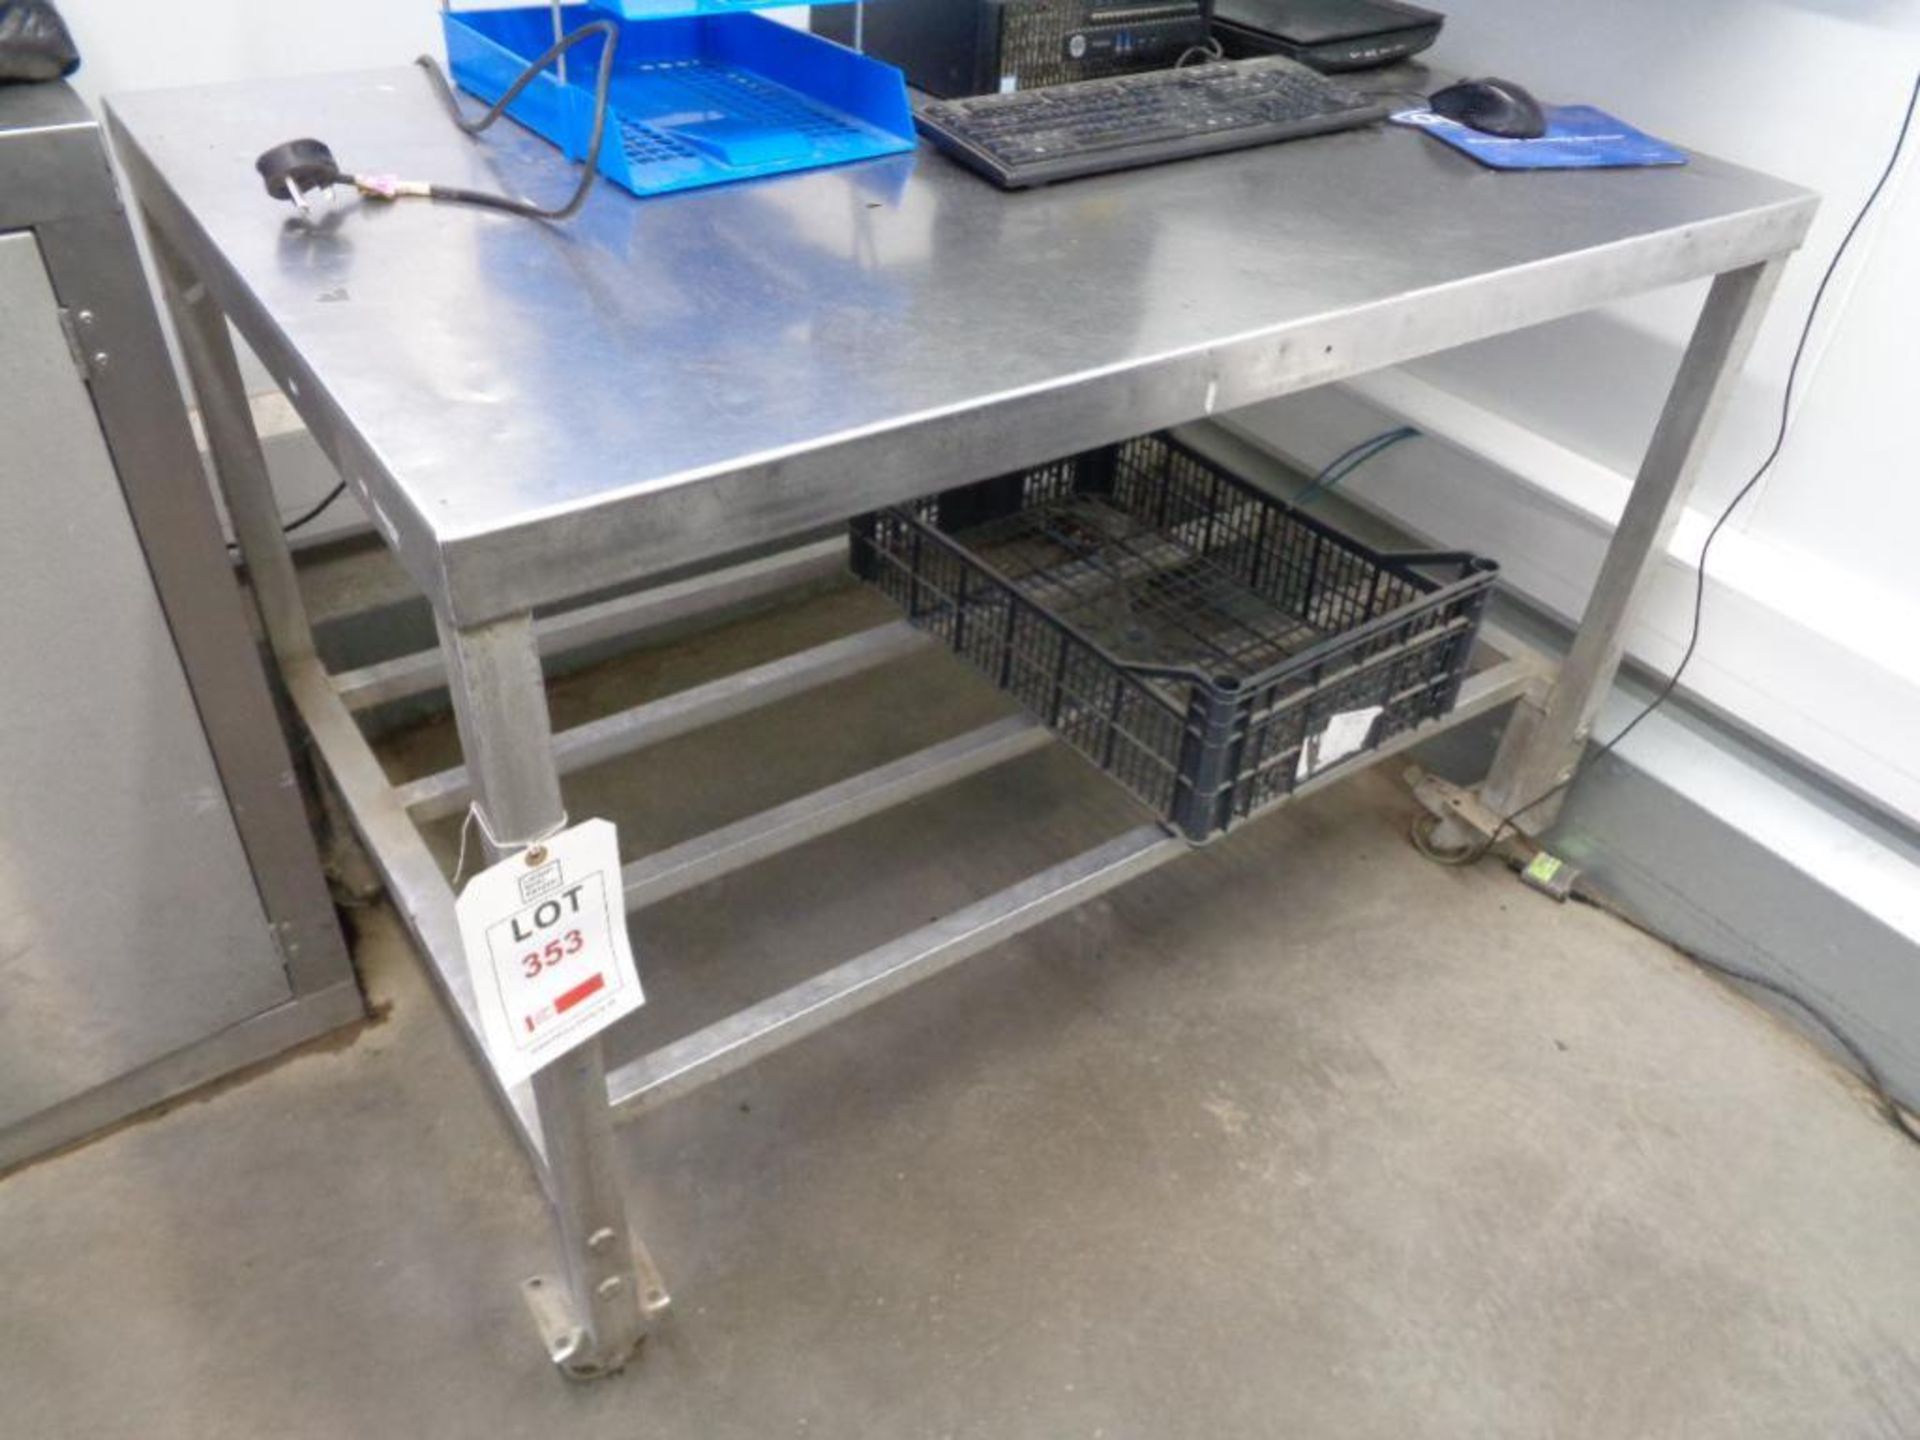 Stainless steel mobile food preparation work surface